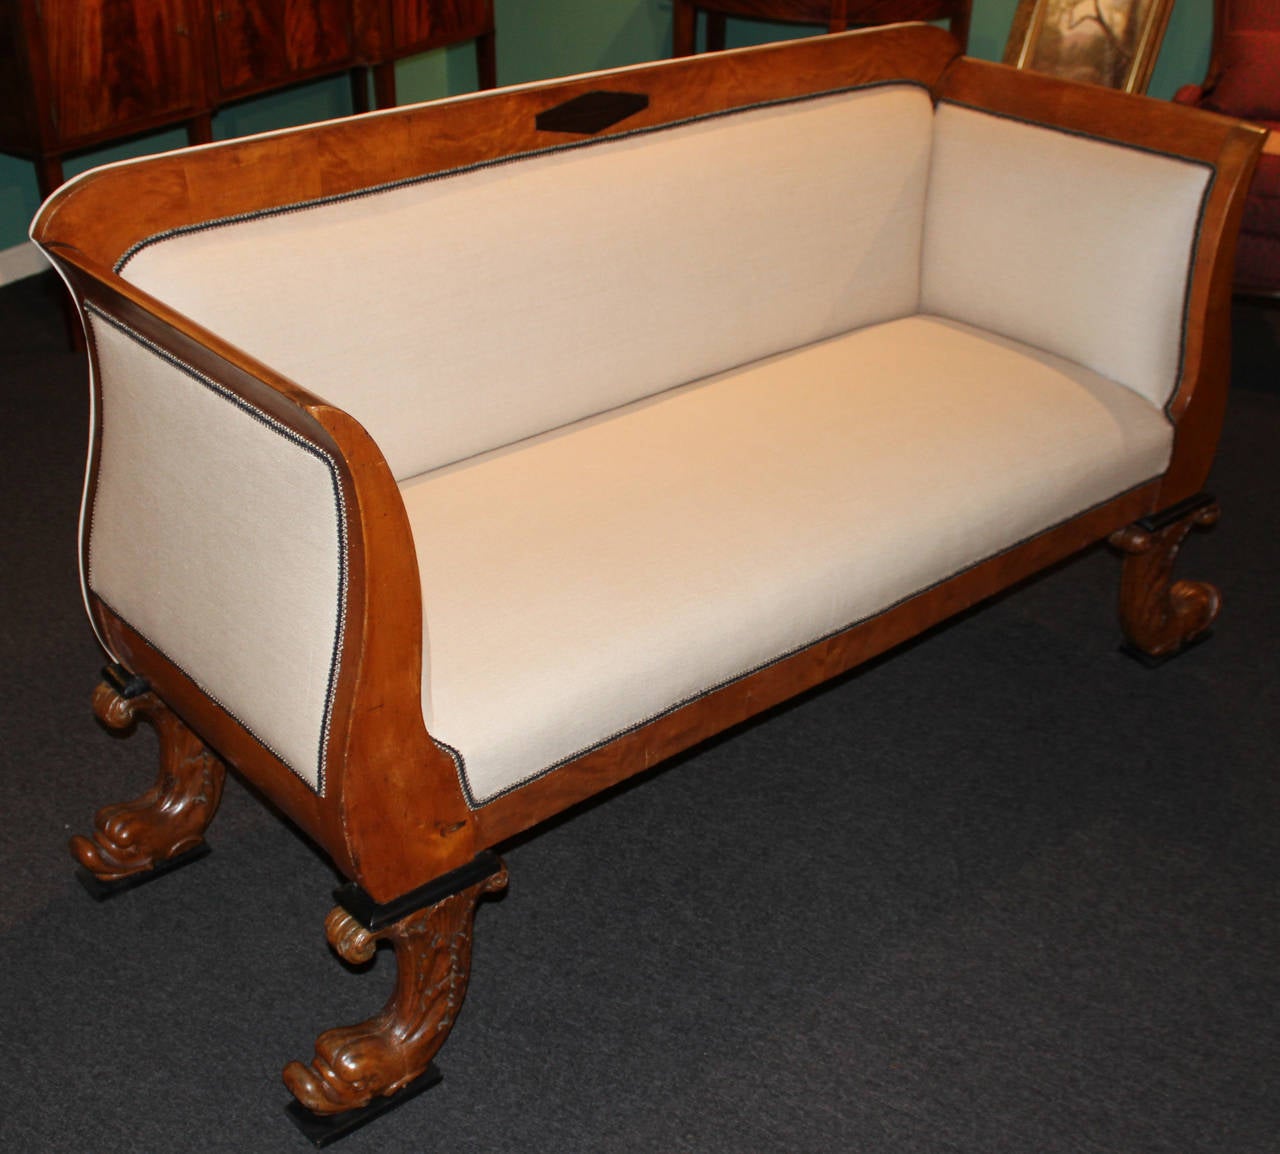 19th Century Biedermeier Settee or Sofa In Excellent Condition For Sale In Milford, NH